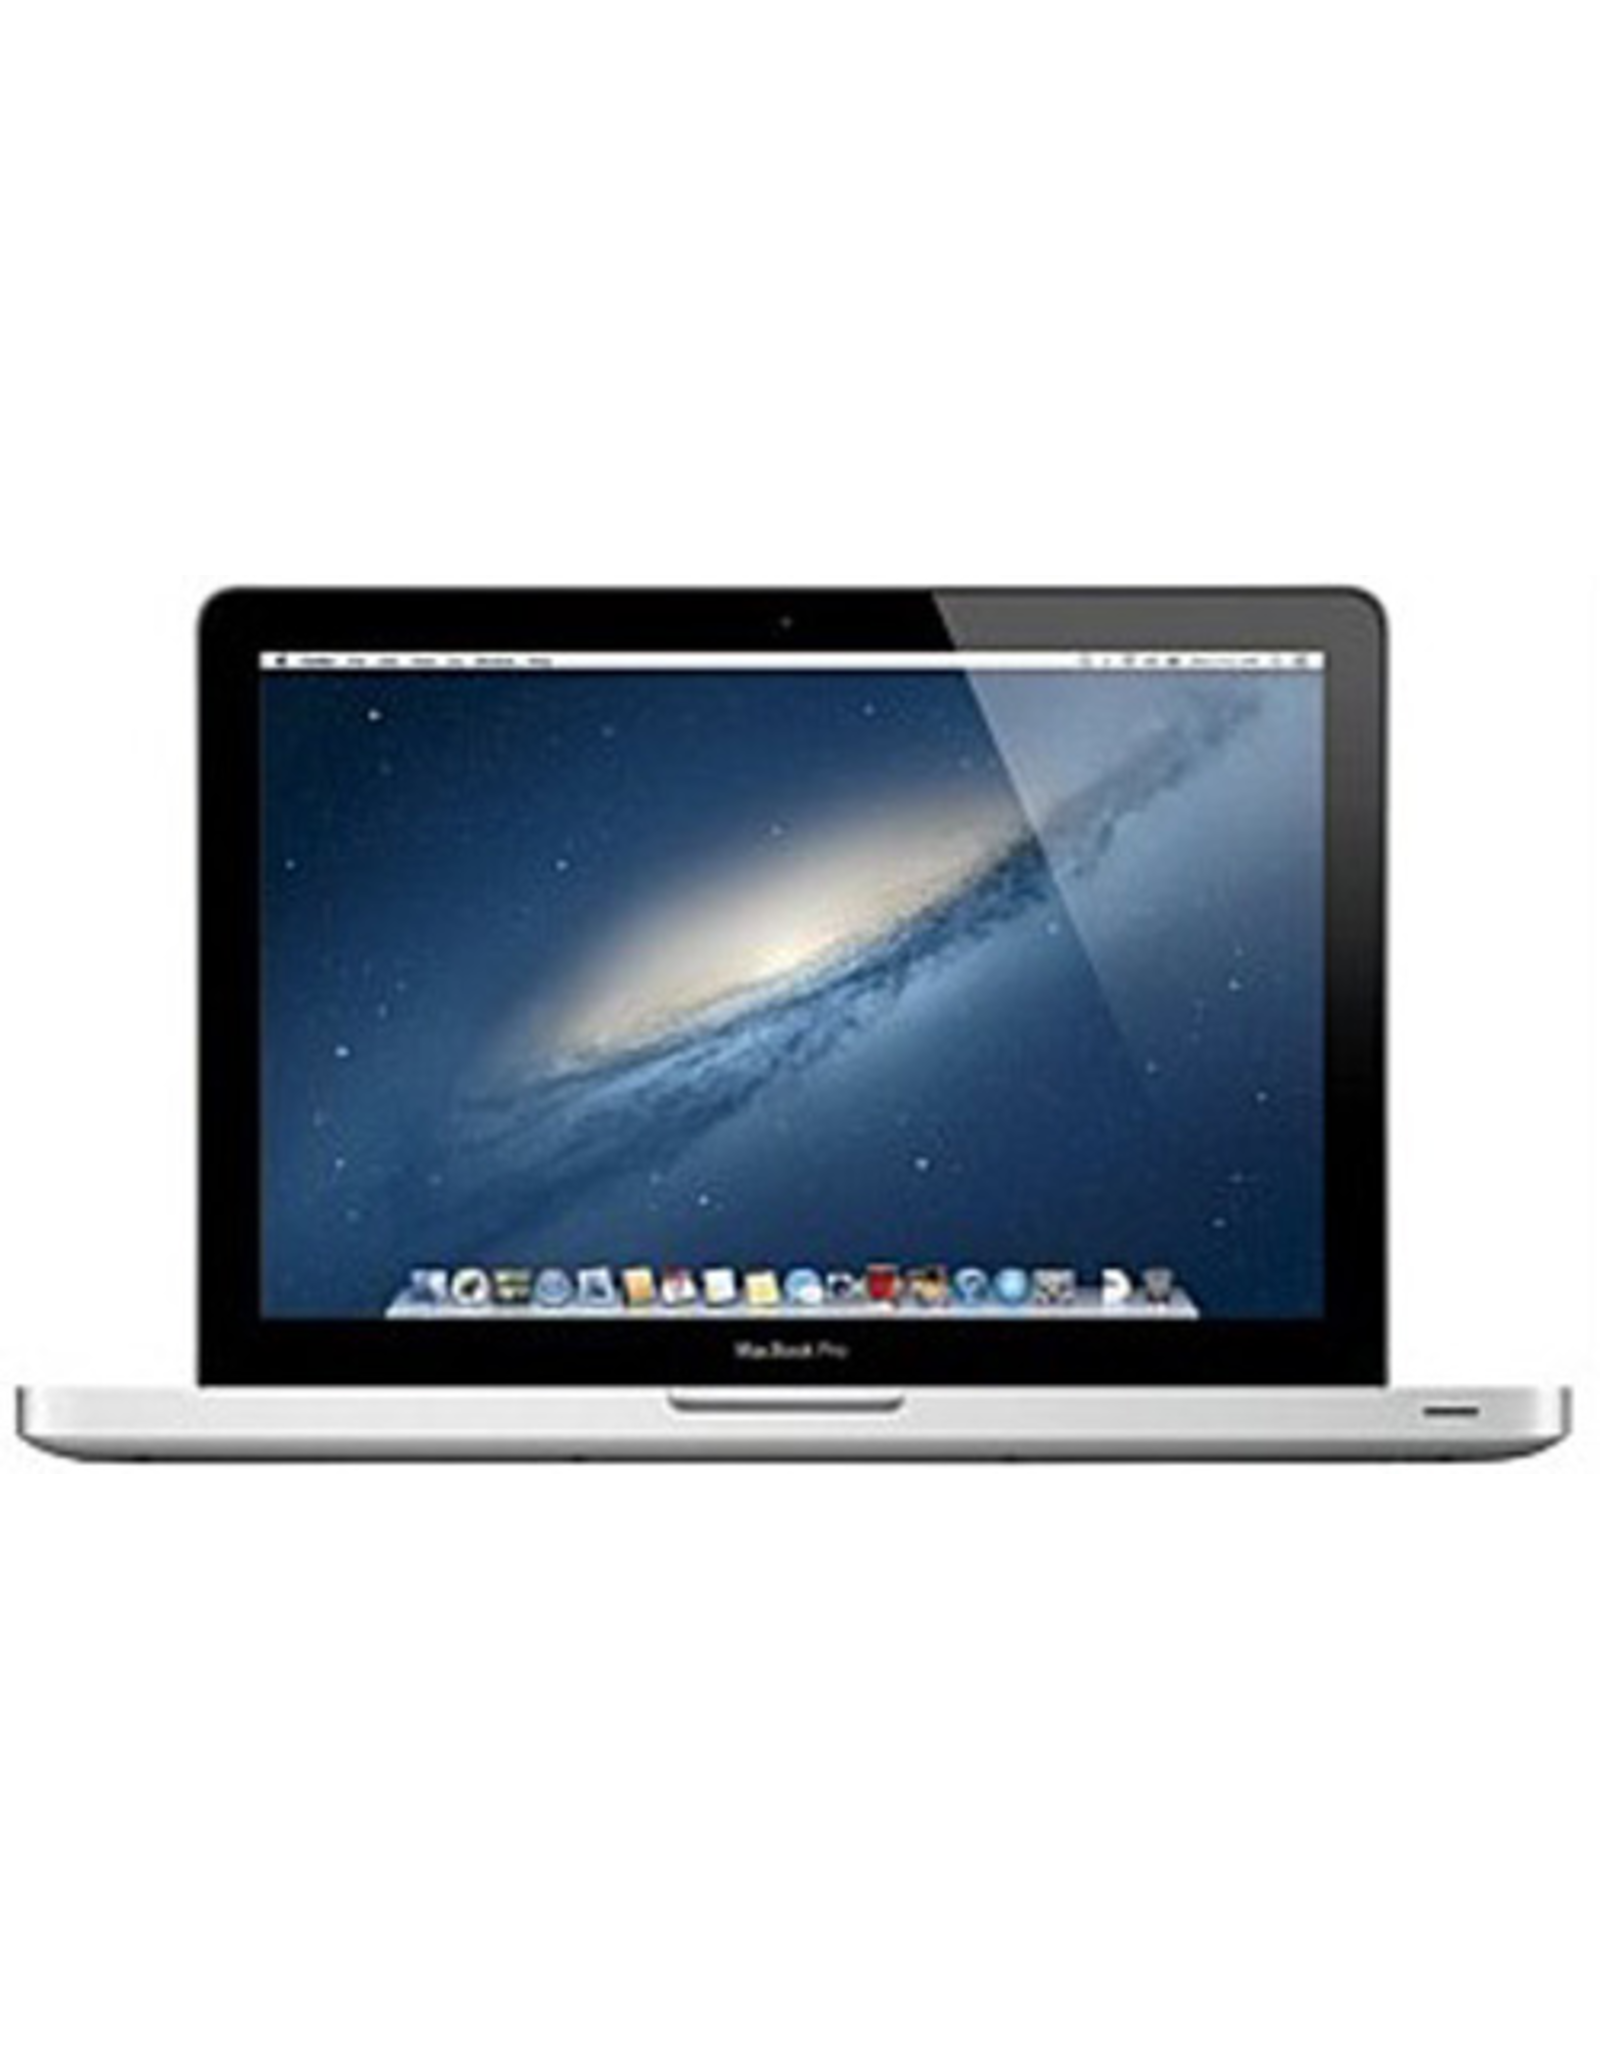 Apple Apple Macbook Pro 13"  2.9GHz dual-core Intel Core i7 Turbo Boost up to 3.6GHz 8GB 1600MHz memory 750GB 5400-rpm hard drive1 Intel HD Graphics 4000 Built-in battery (7 hours) **Was $1698.00**